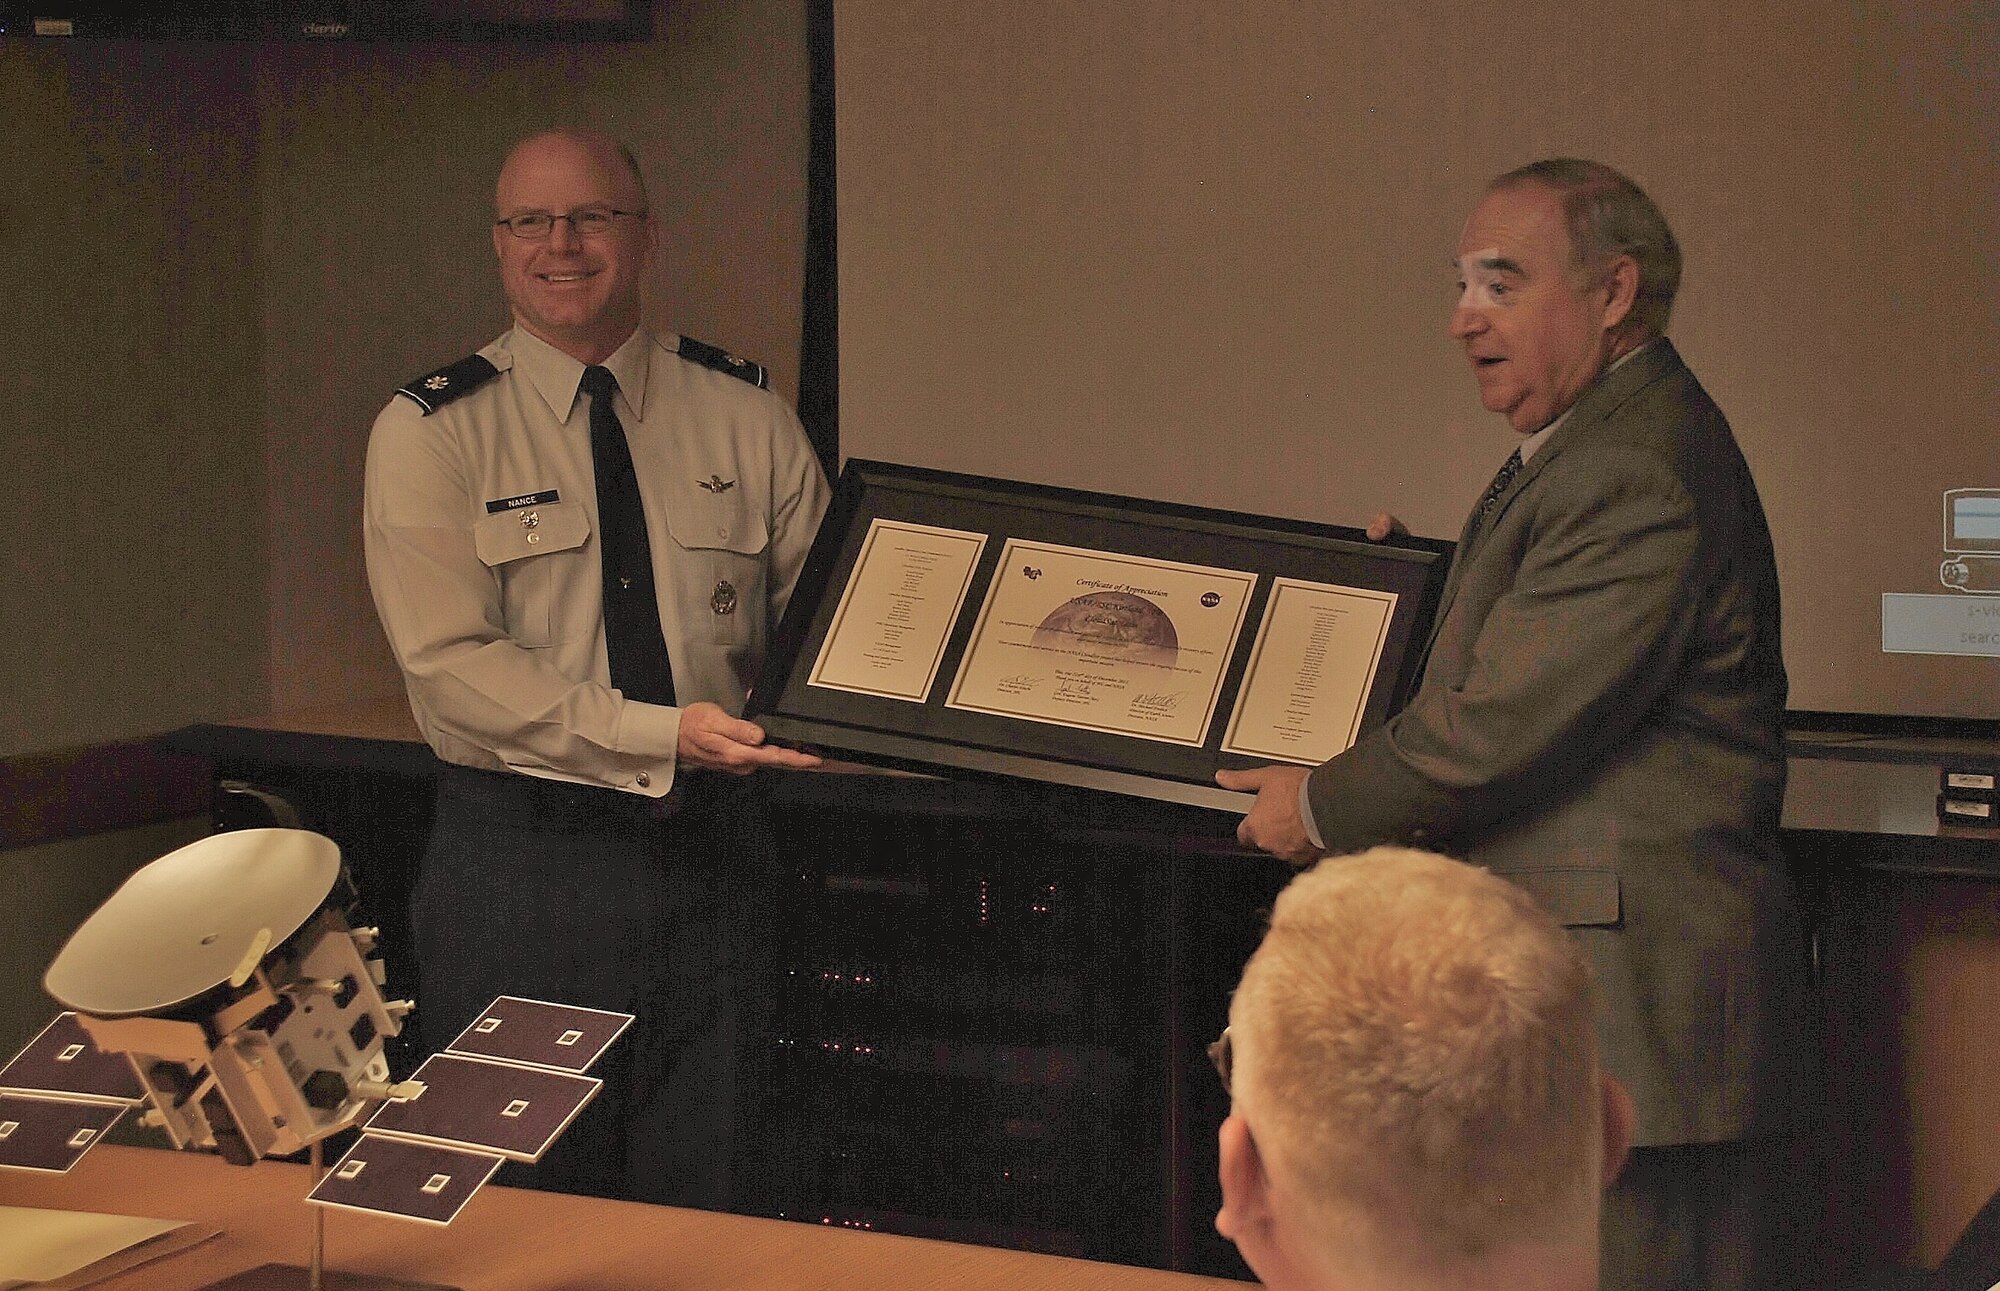 Lt. Col. Joseph Nance, Space Operations Branch chief, left, accepts the NASA certificate of appreciation on behalf of the CloudSat team from retired Lt. Gen. Gene Tattini.